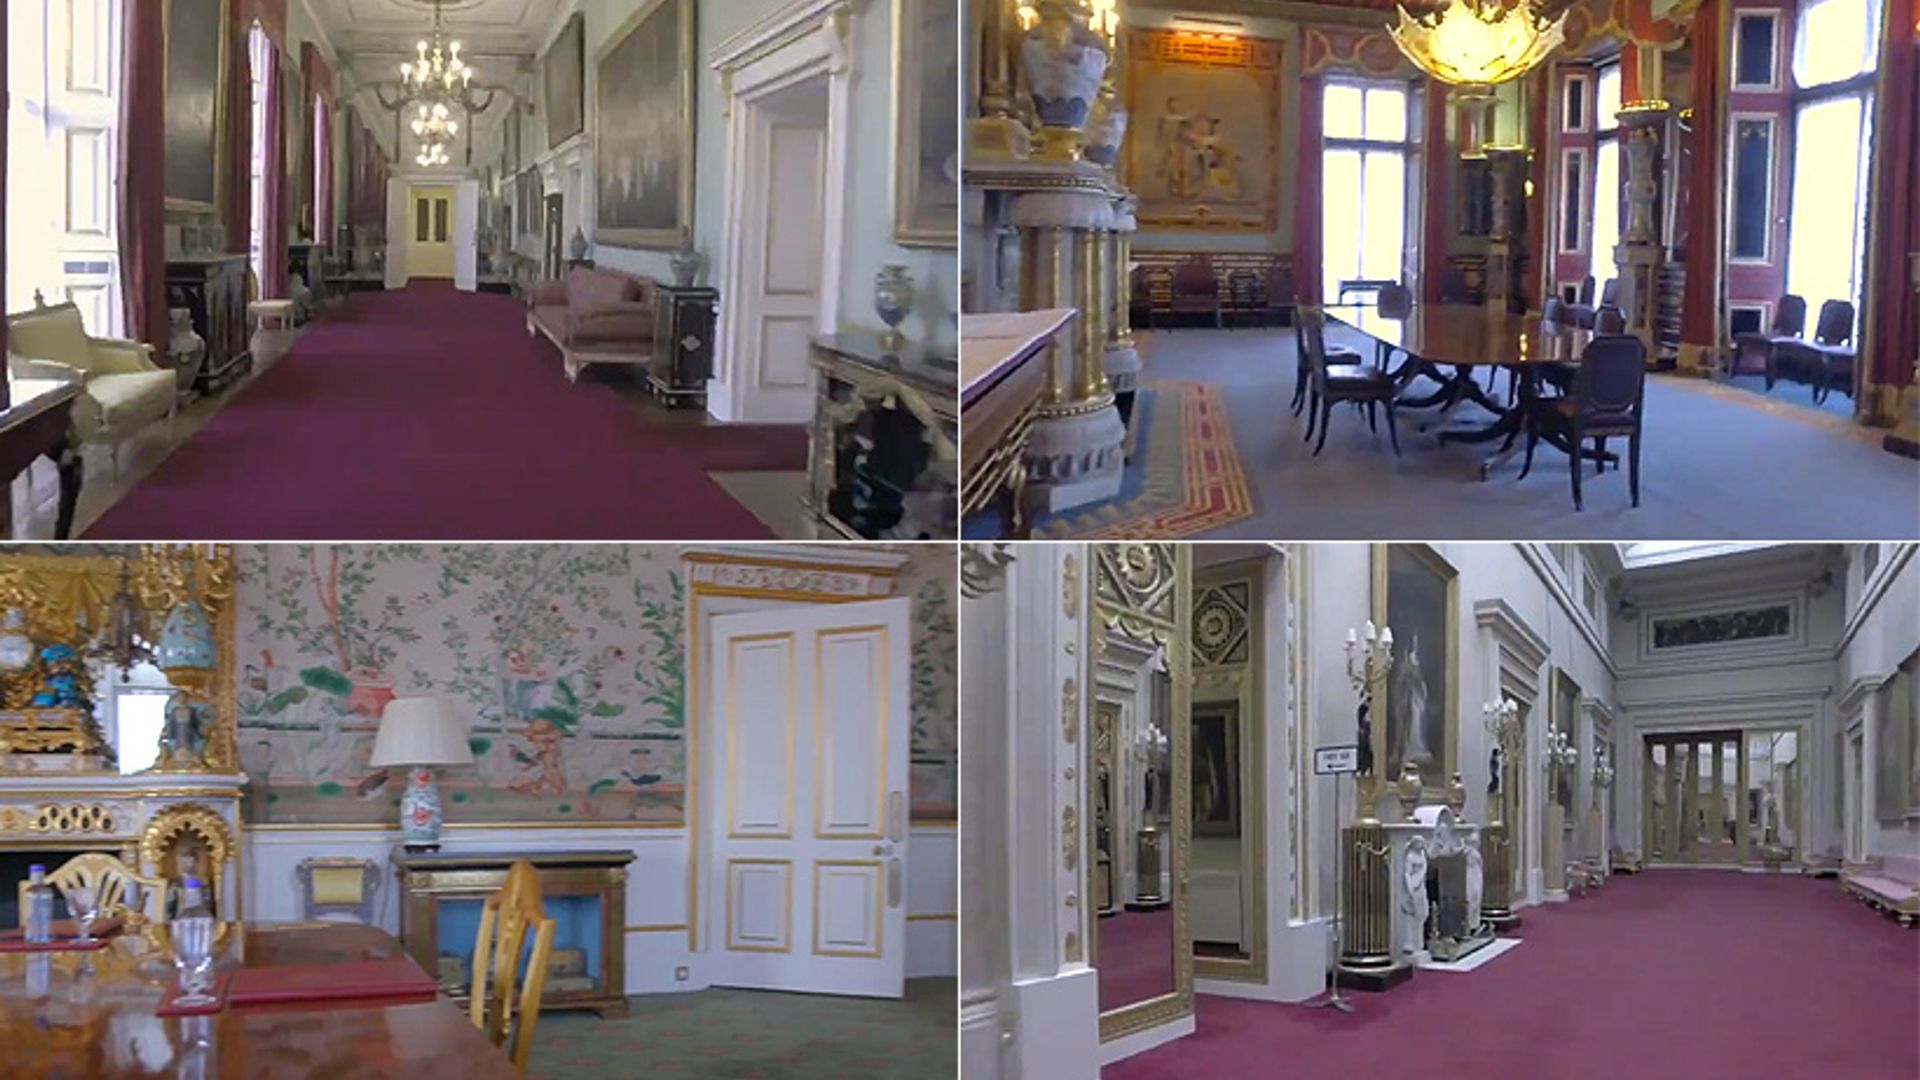 Take A Tour Of Buckingham Palace To See